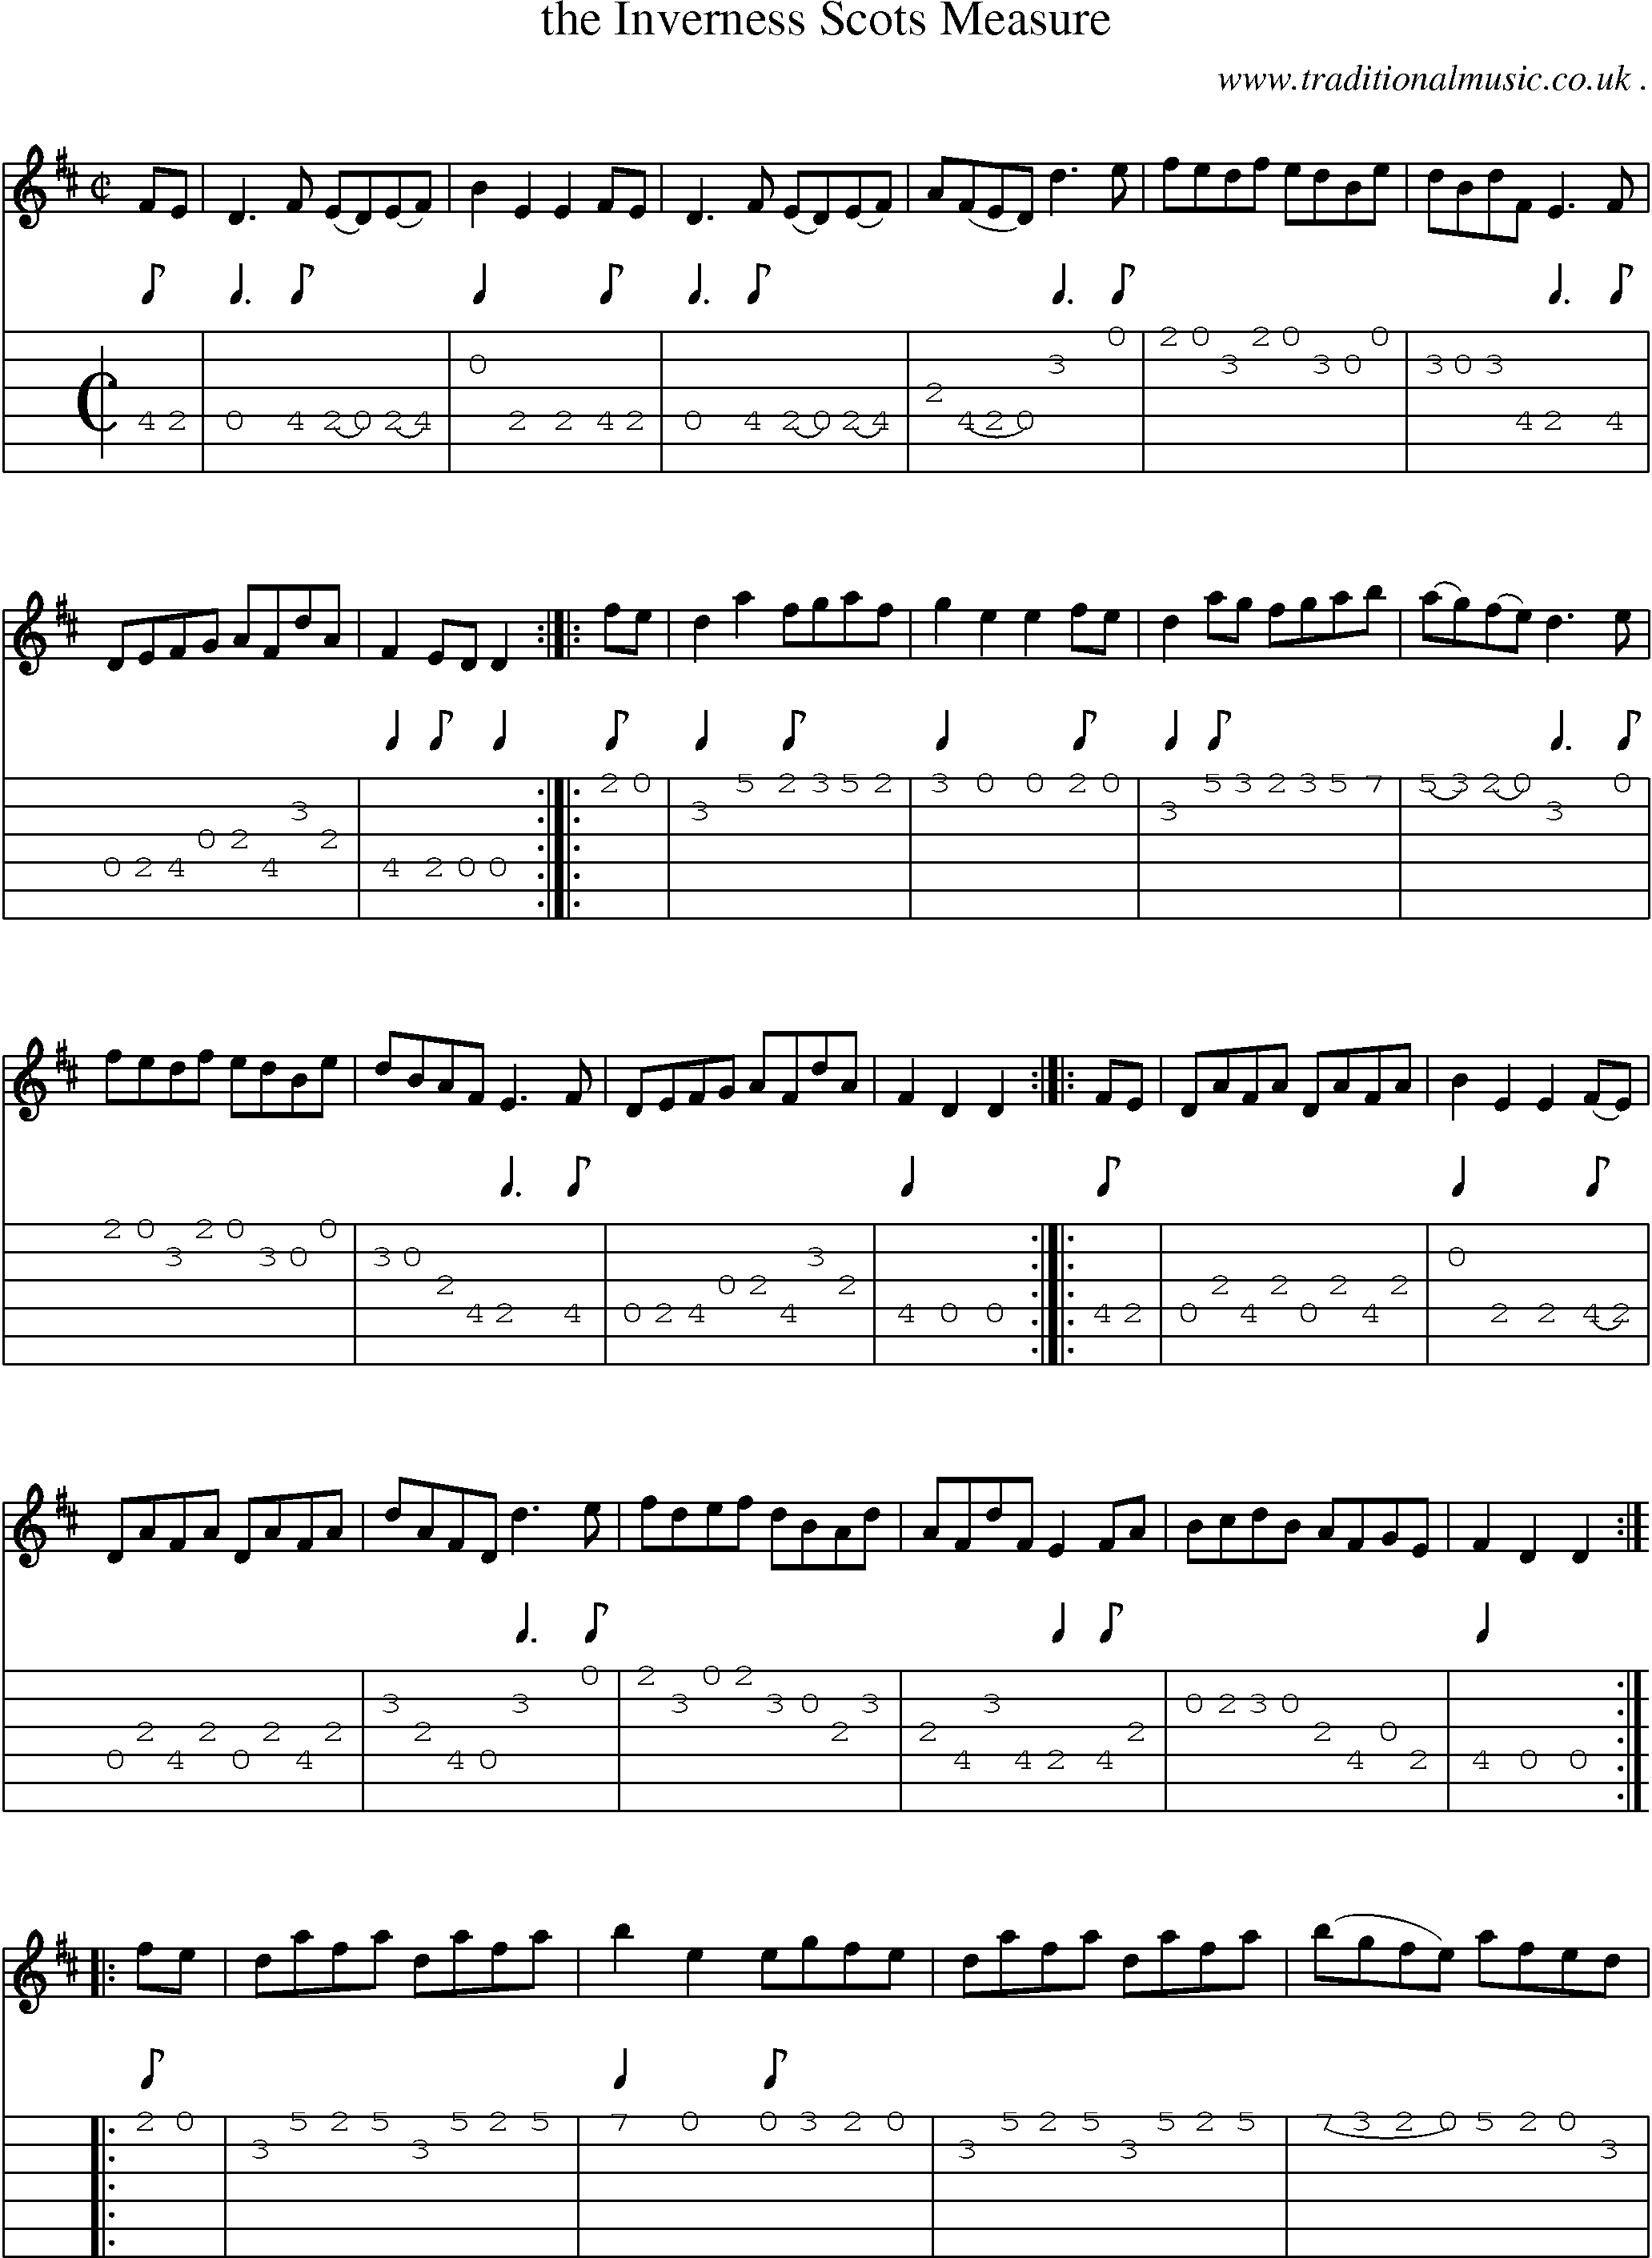 Sheet-Music and Guitar Tabs for The Inverness Scots Measure